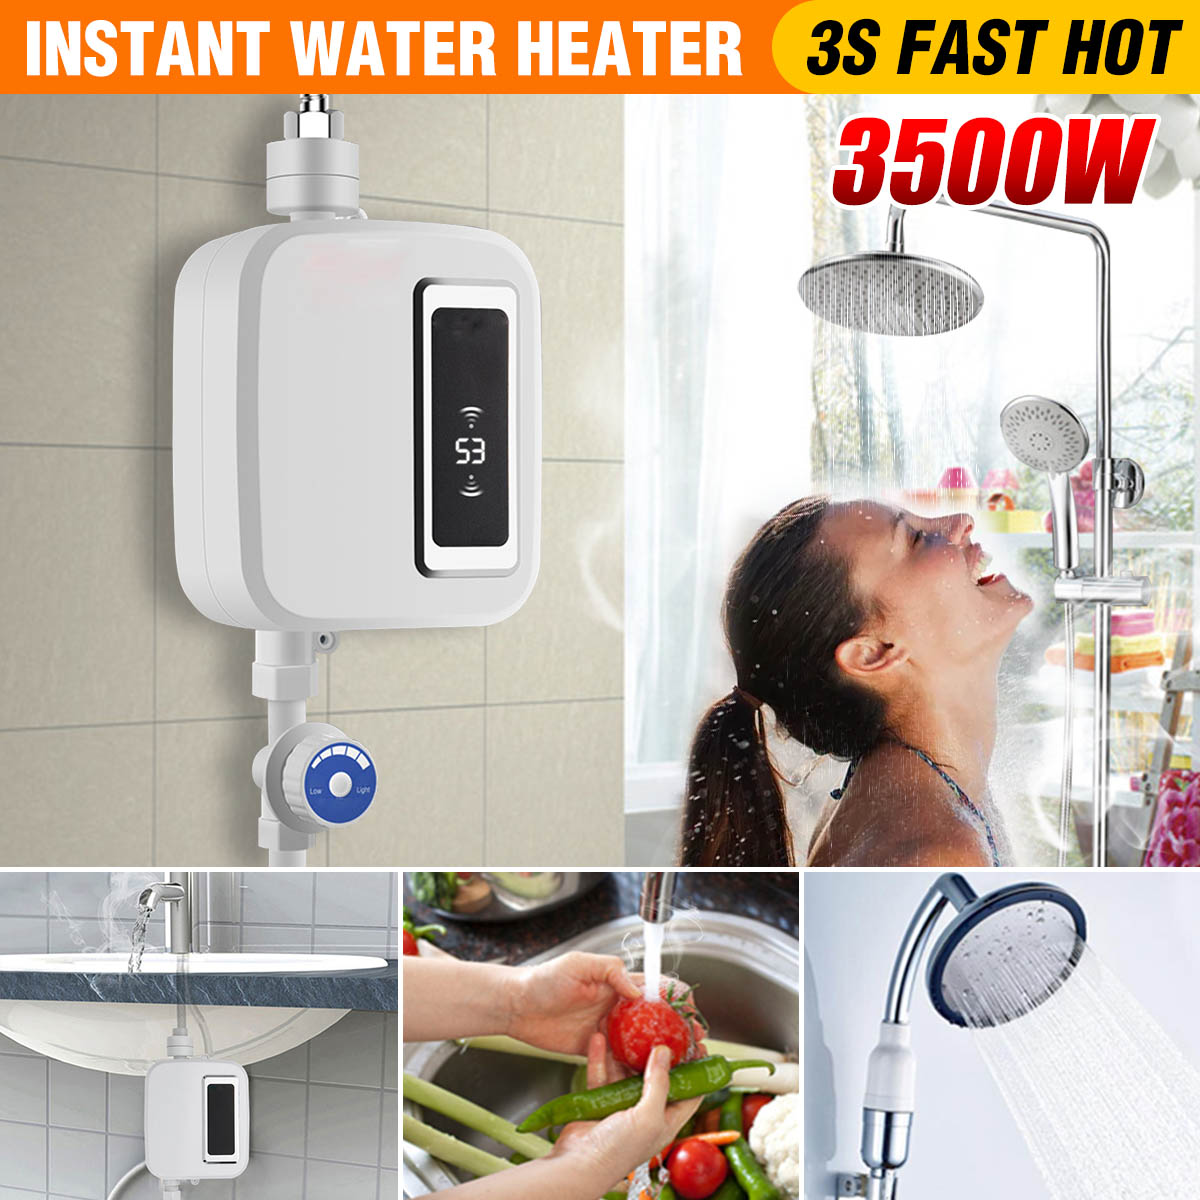 3500W Water Heater Bathroom Kitchen Instant Electric Hot Water Heater Tap Temperature LCD Display Faucet Shower Tankless